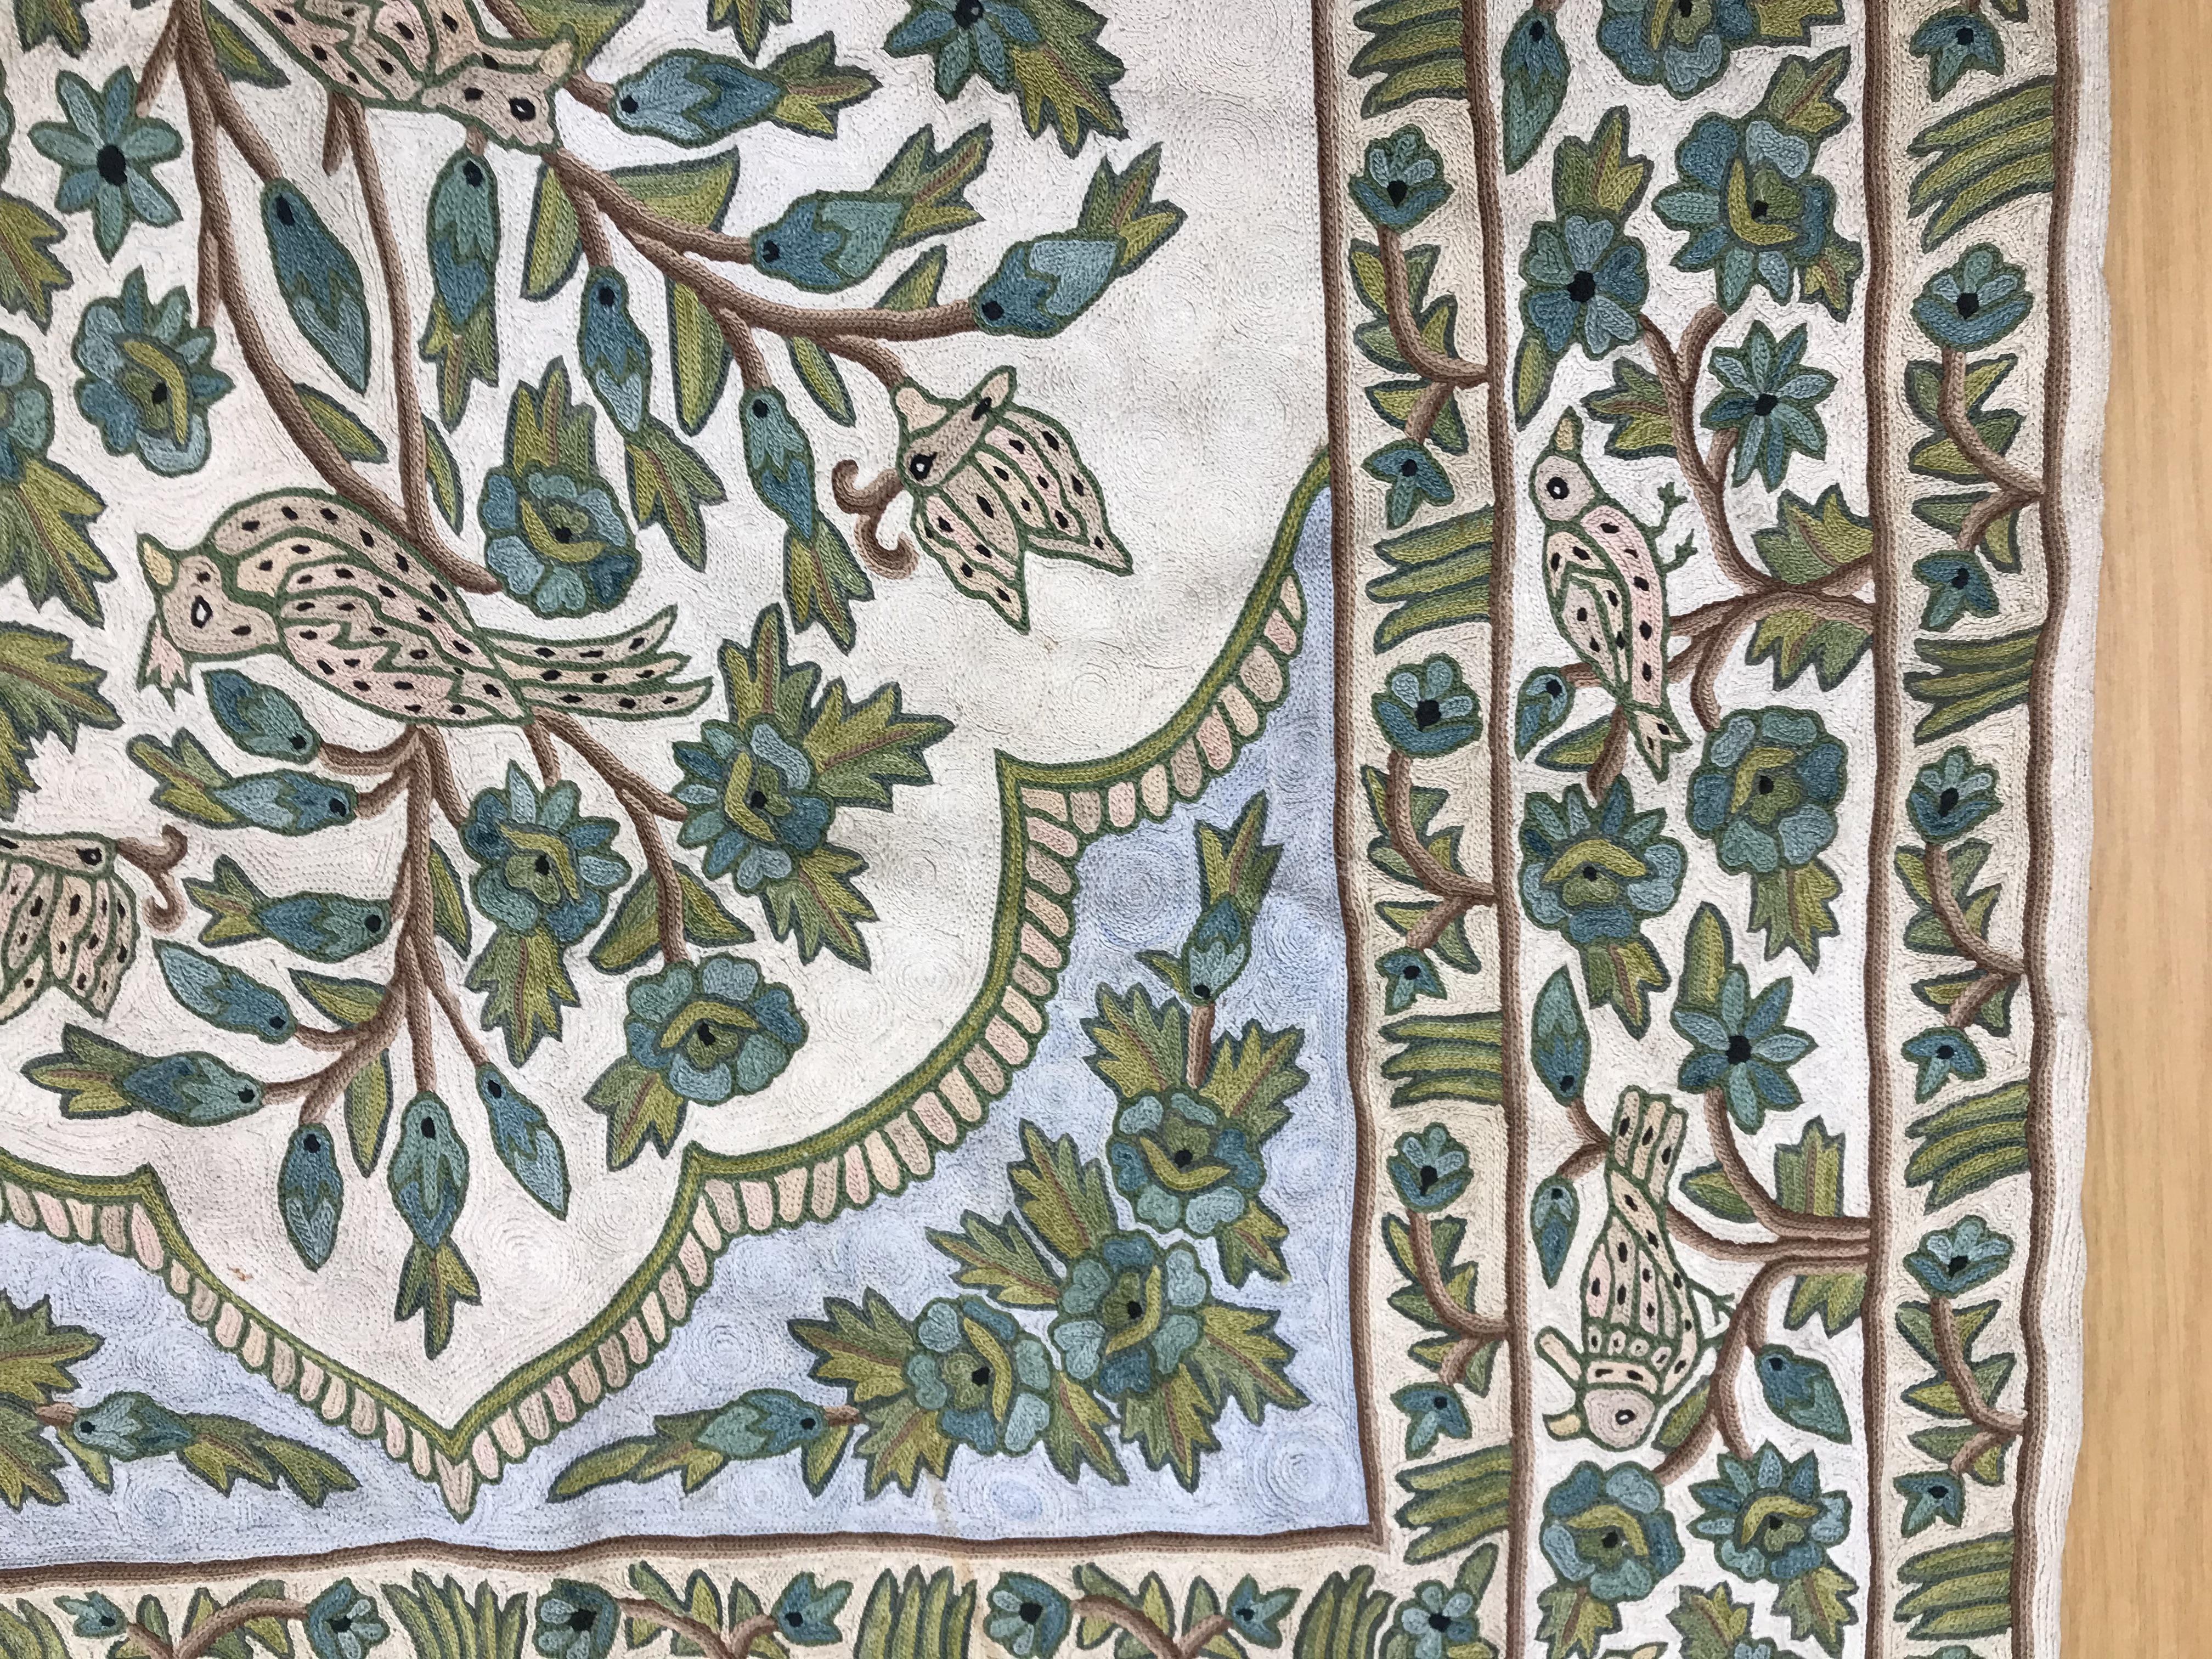 A crewel work panel depicting tree and birds in blue and teal on a cream and blue ground, - Image 11 of 16